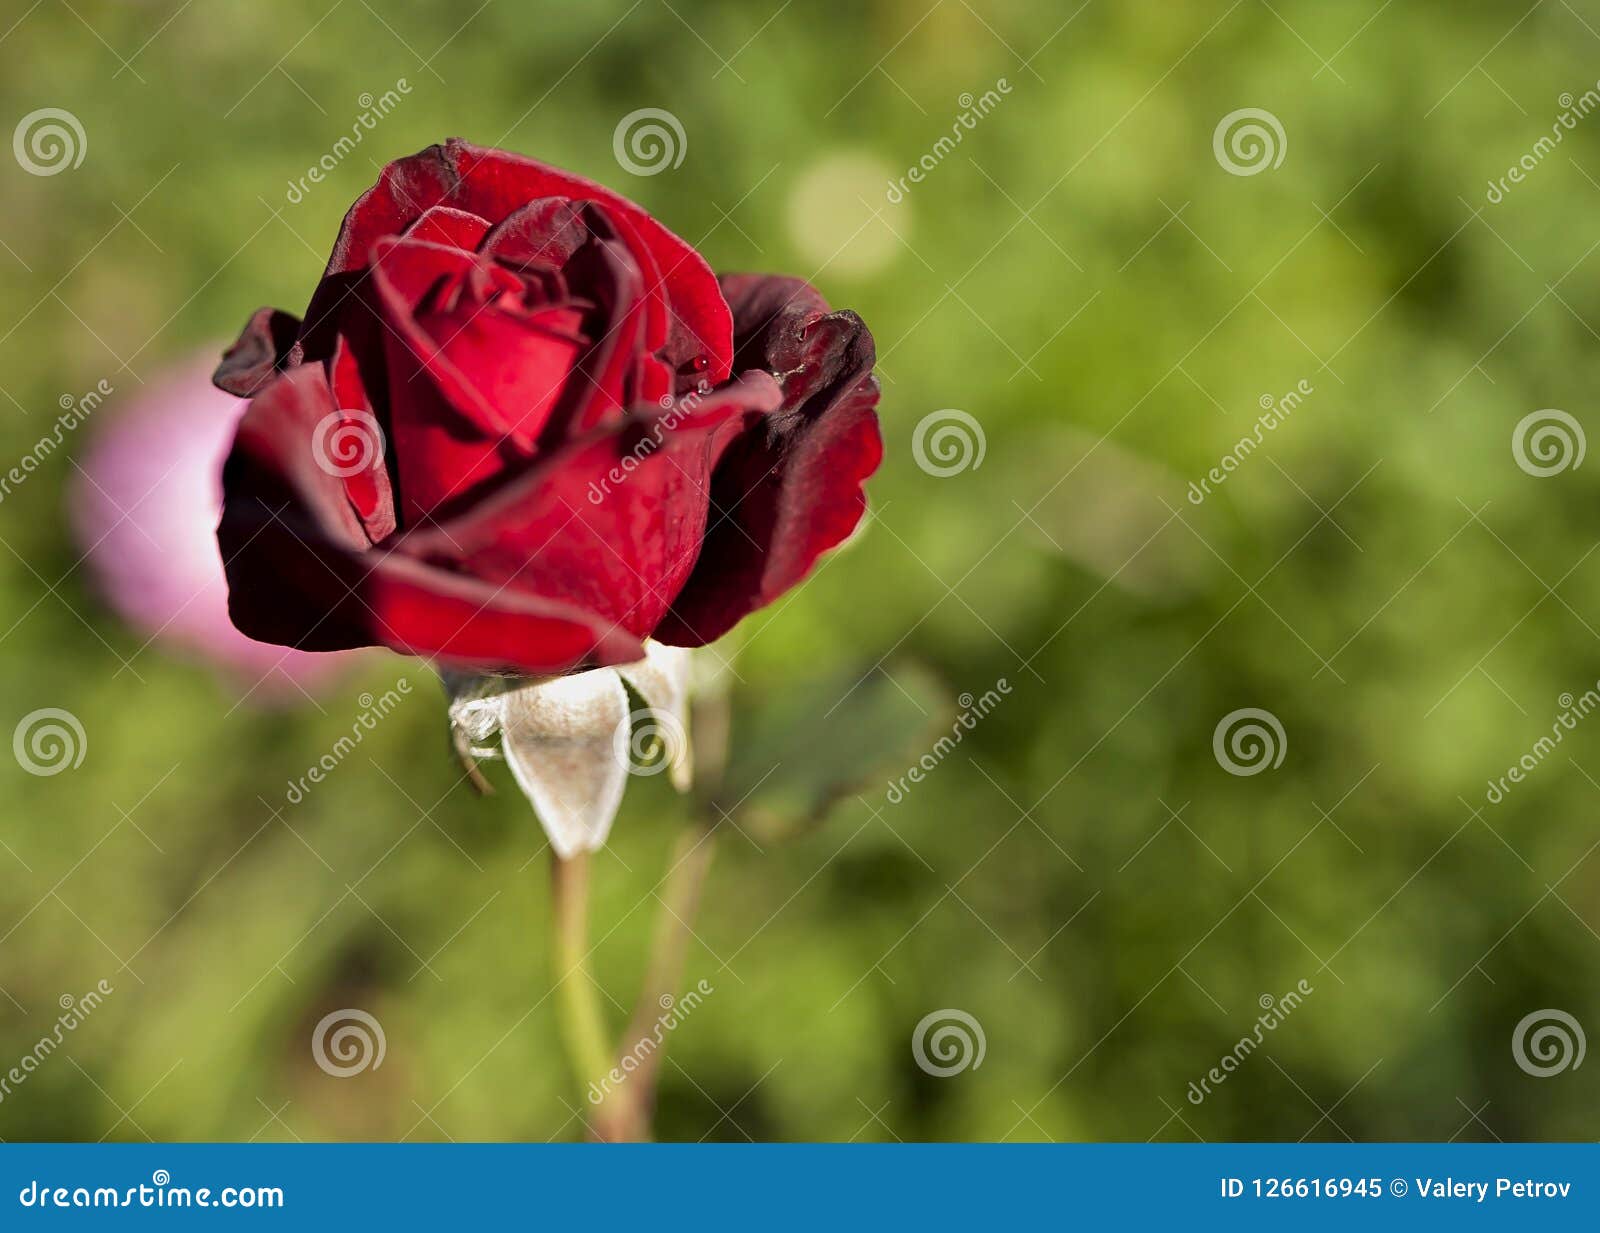 Red Rose On The Background Of Natural Greenery, Soft Focus Stock Image